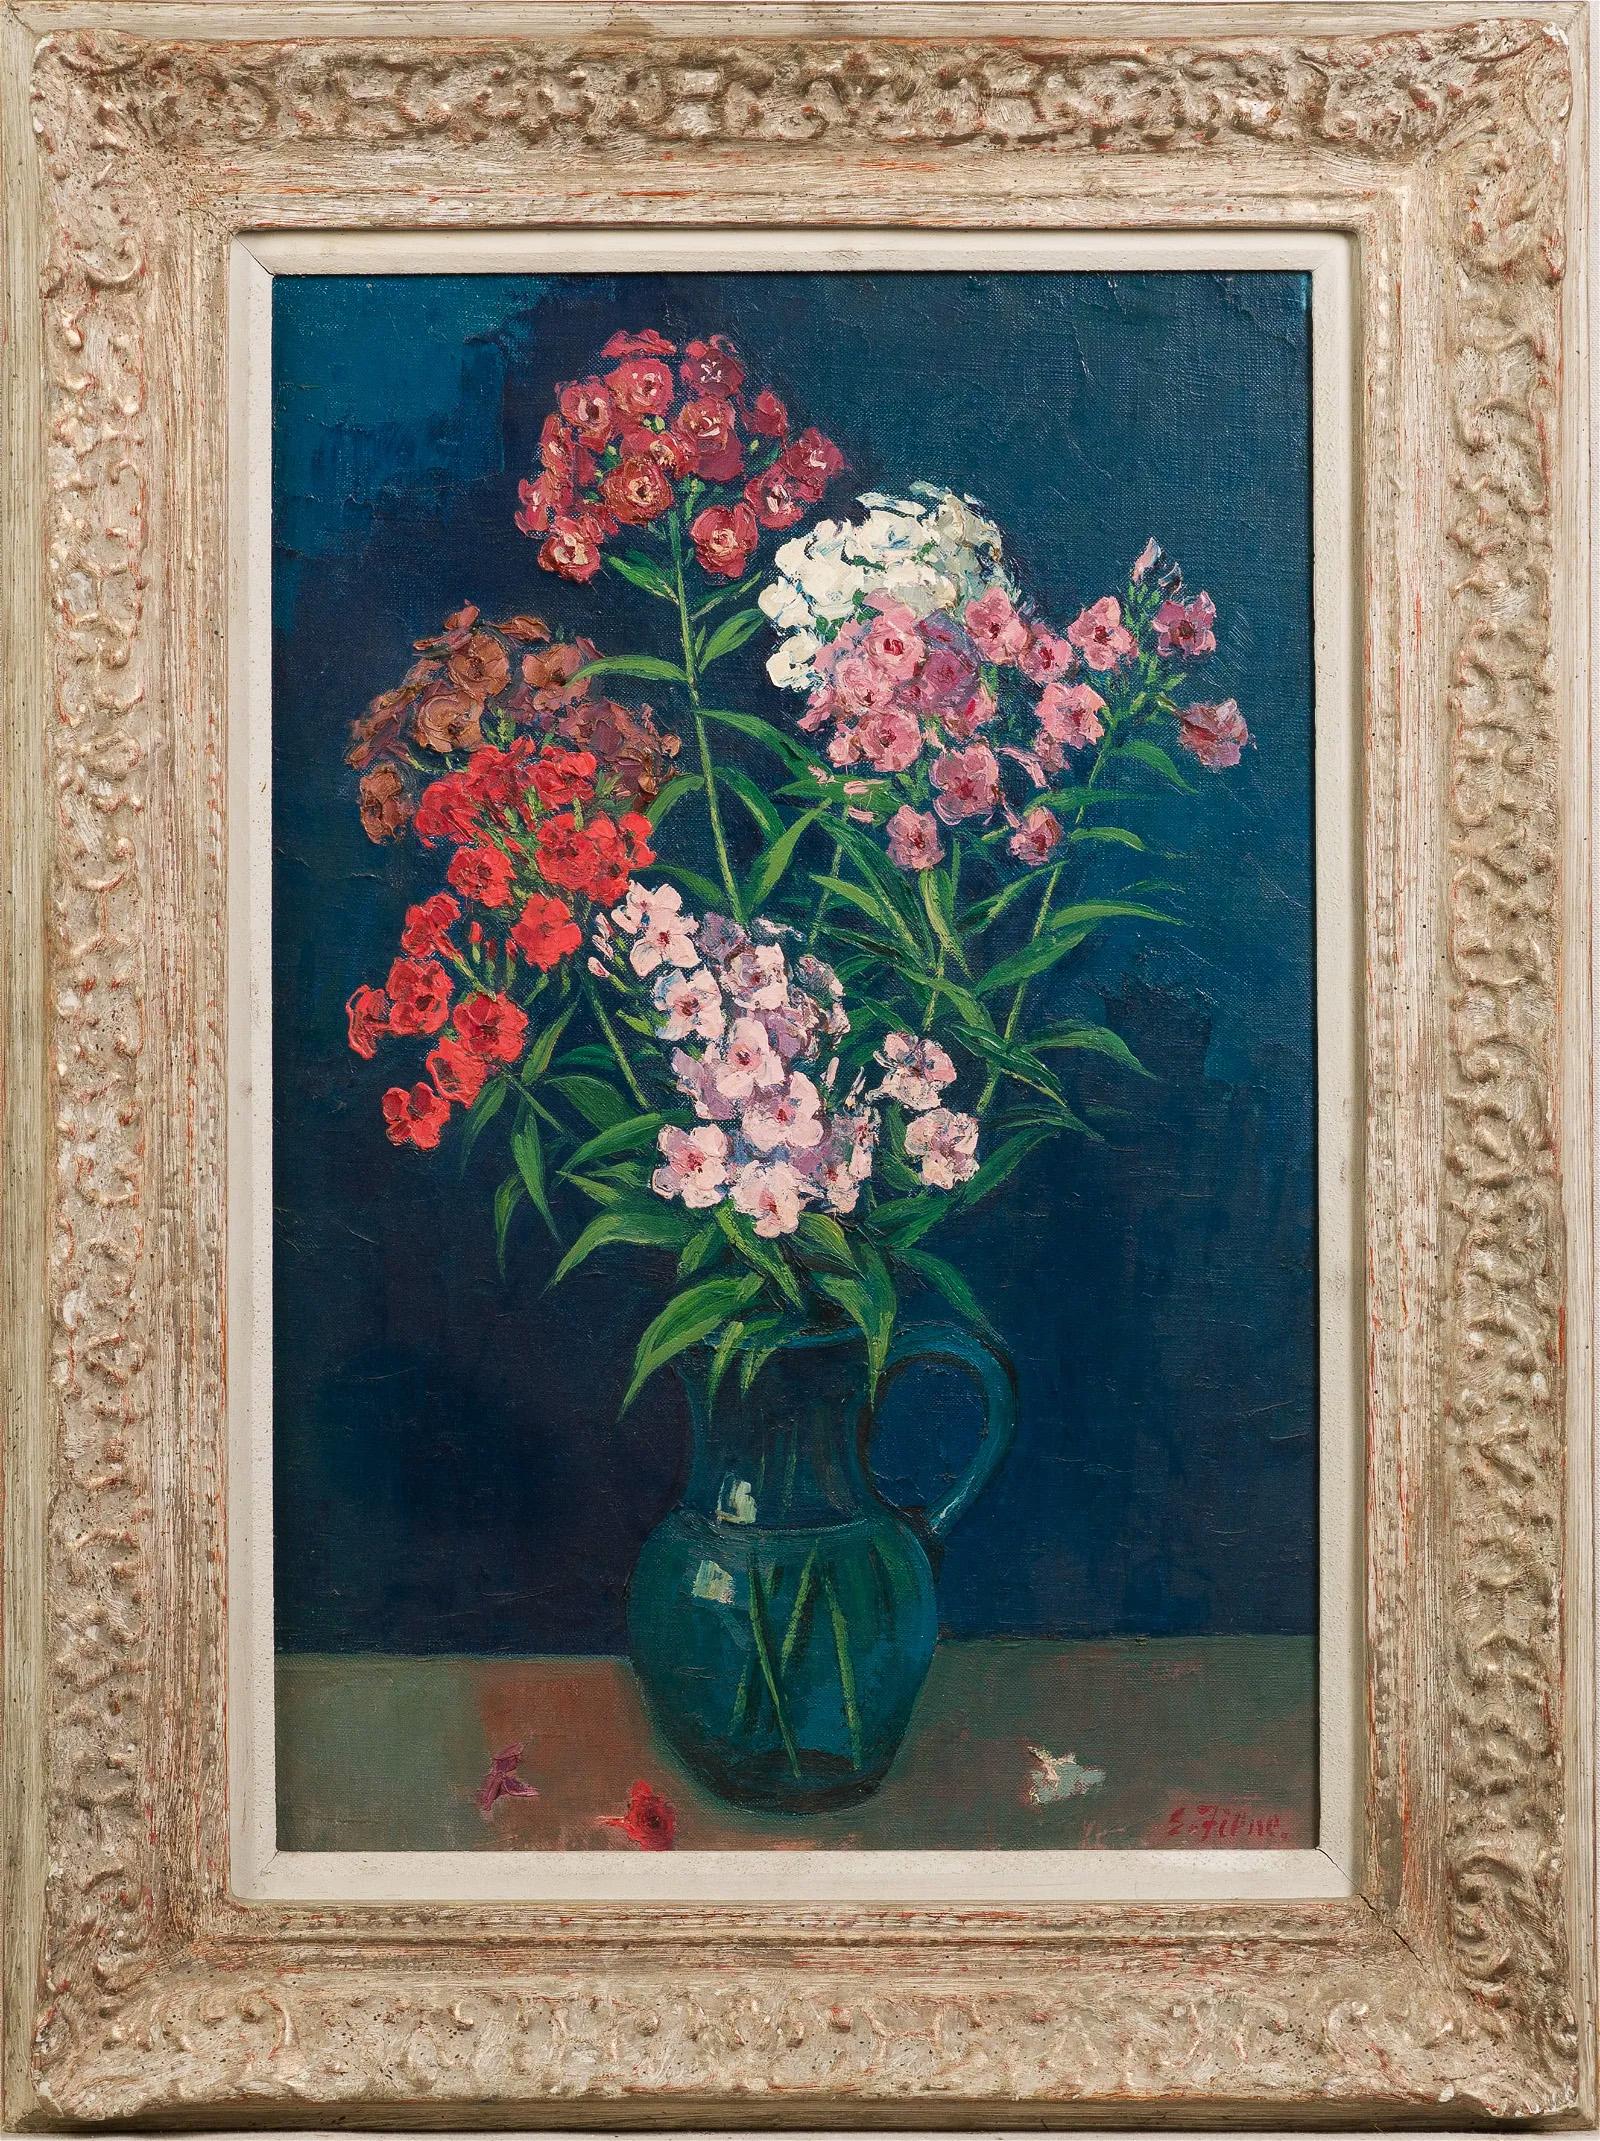 Phlox Flower Still Life Oil Painting Antique Exhibited Large Framed Oil Painting